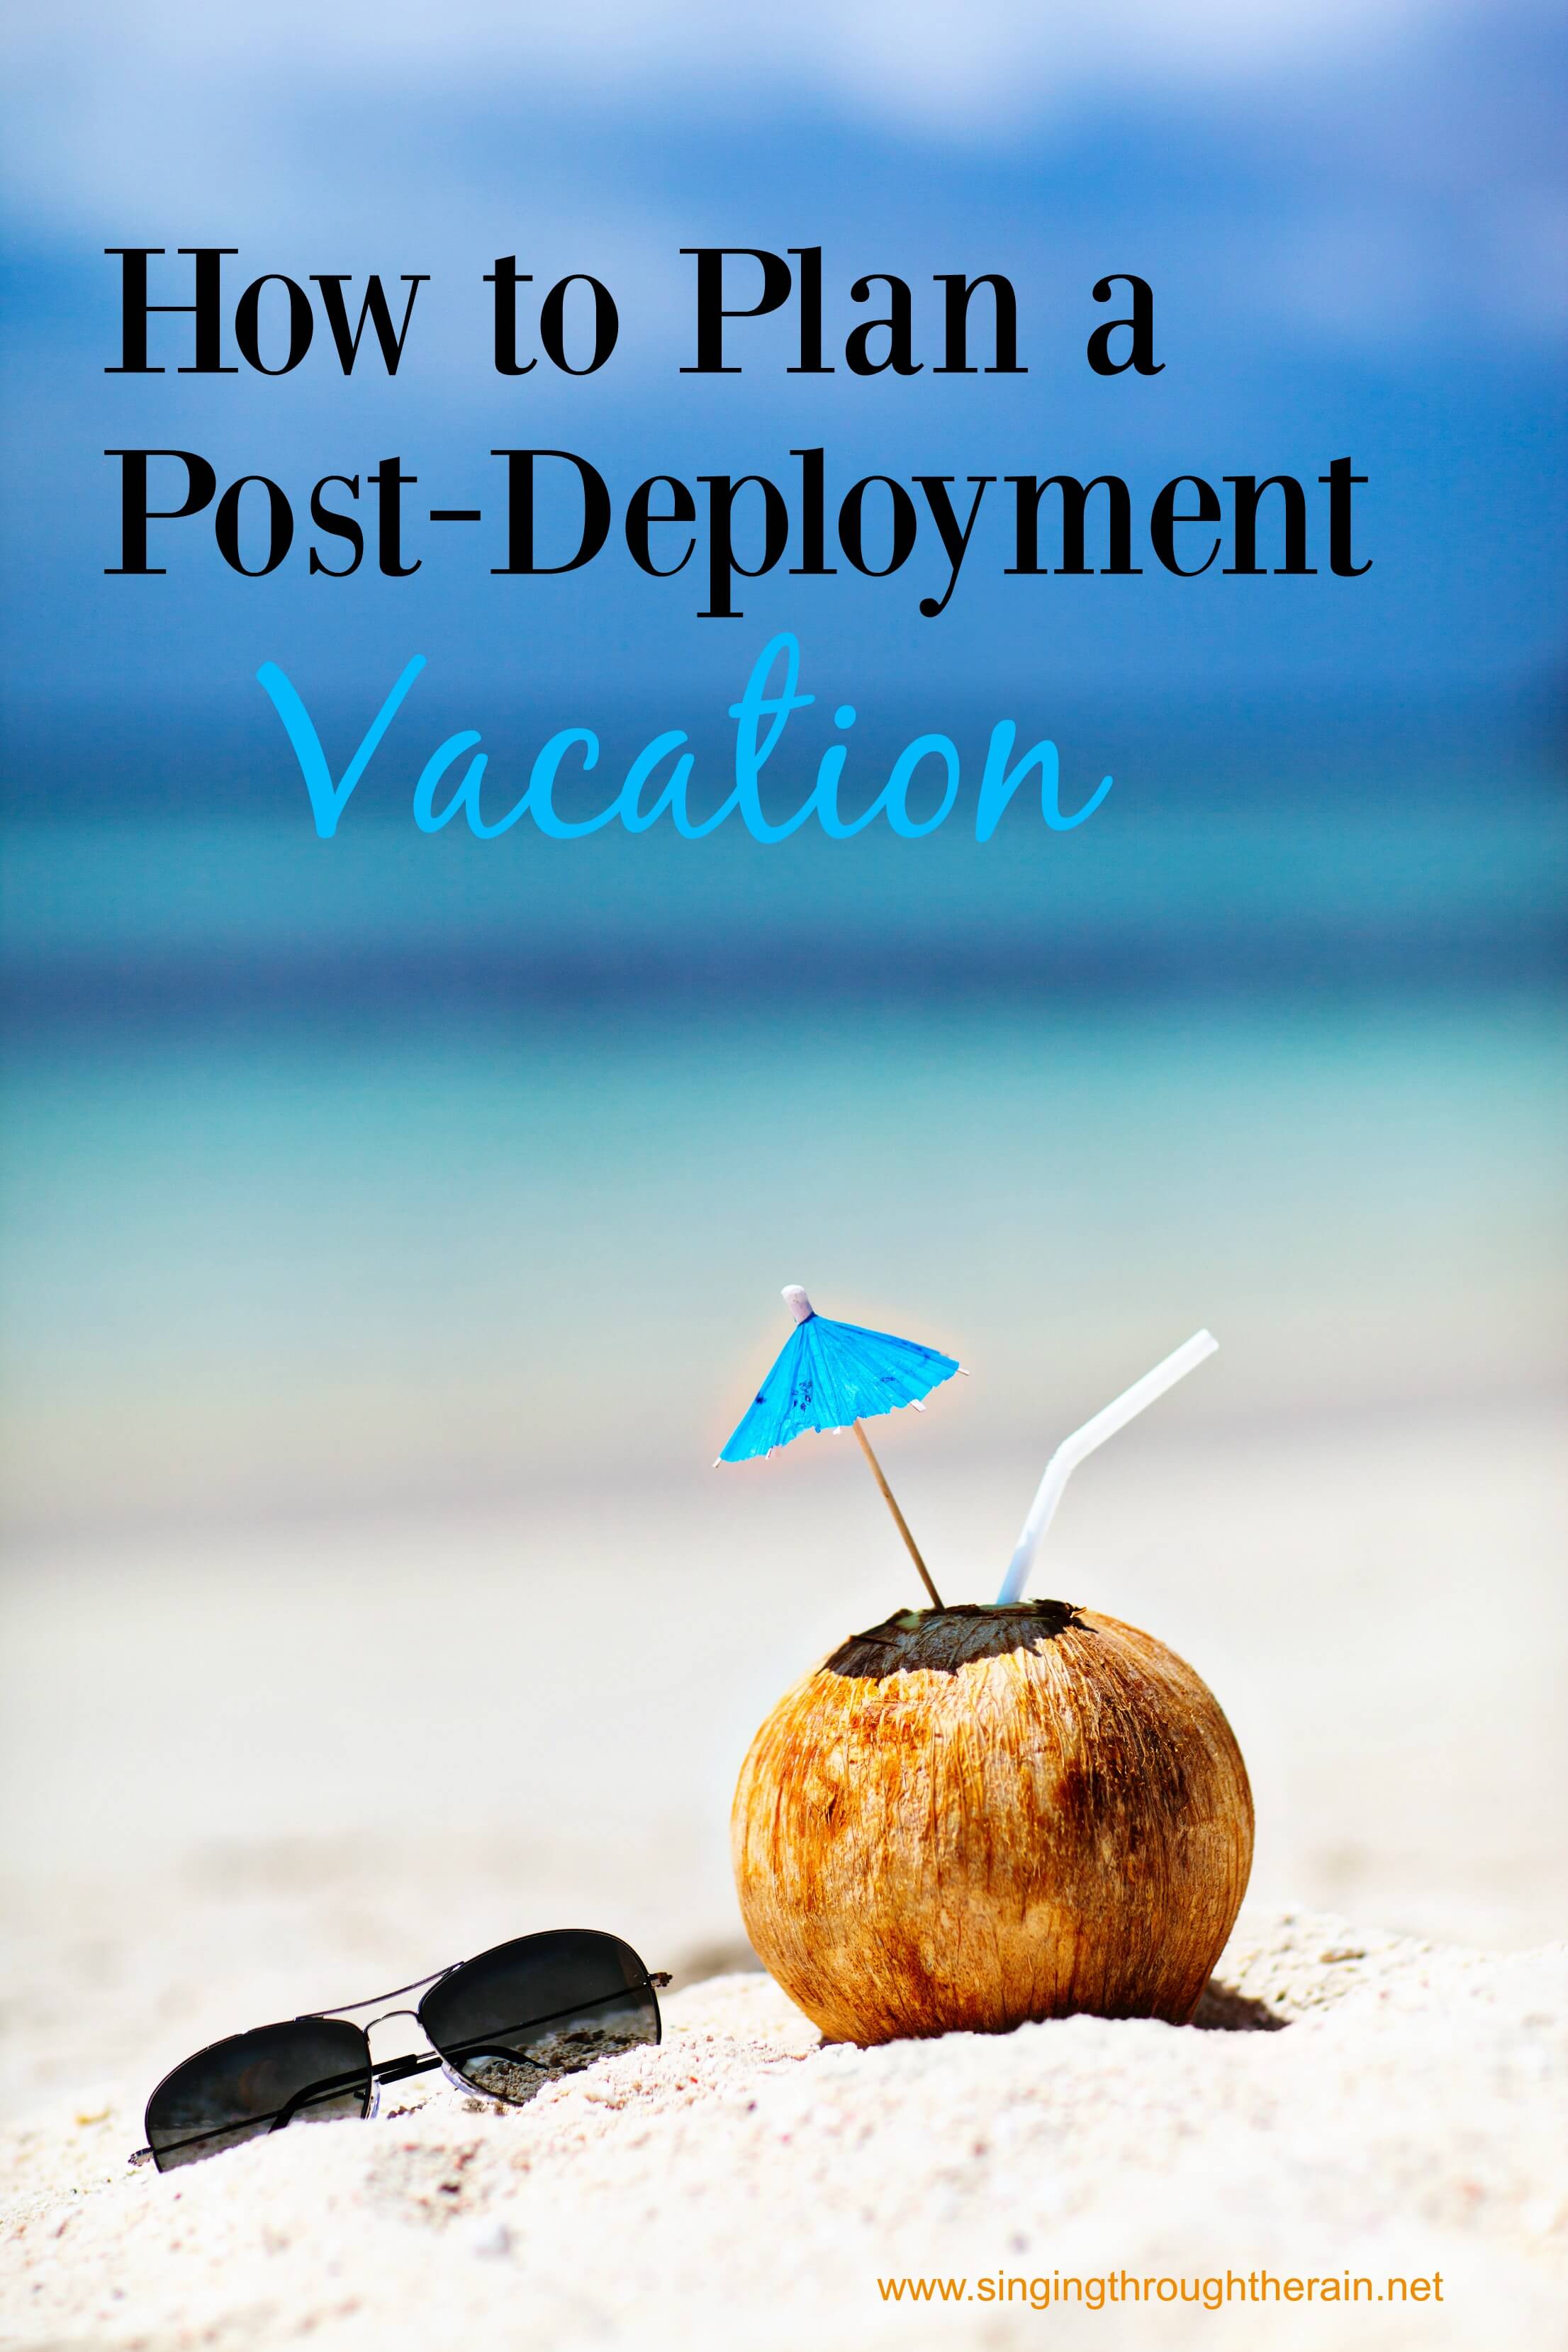 How to Plan a Post-Deployment Vacation